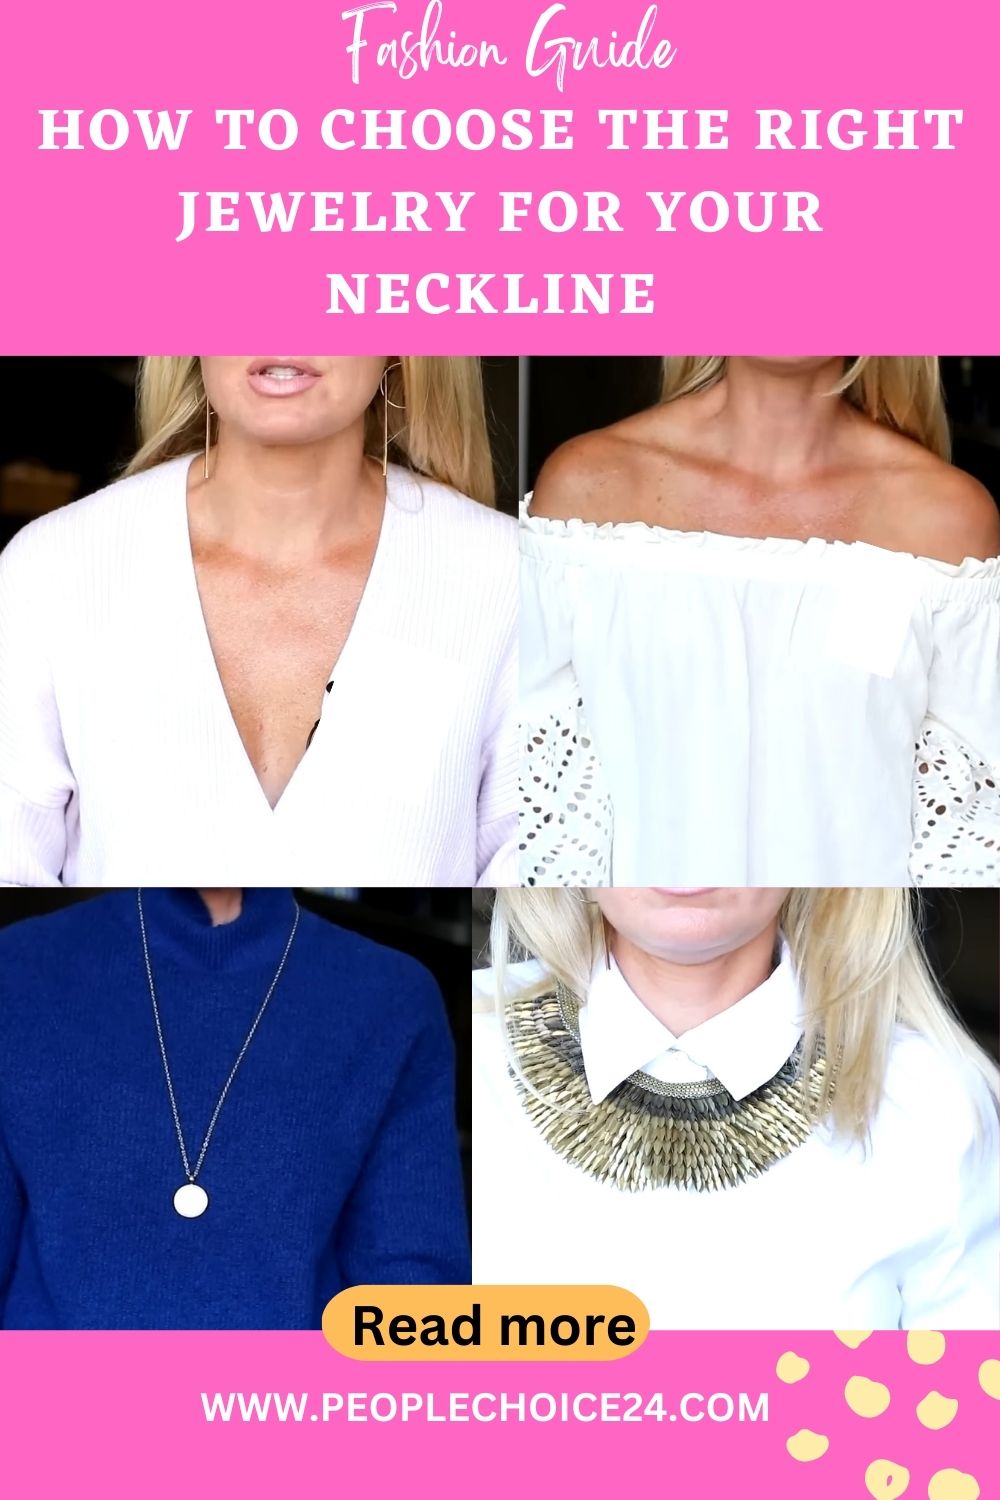 How to Choose the Right Jewelry for Your Neckline